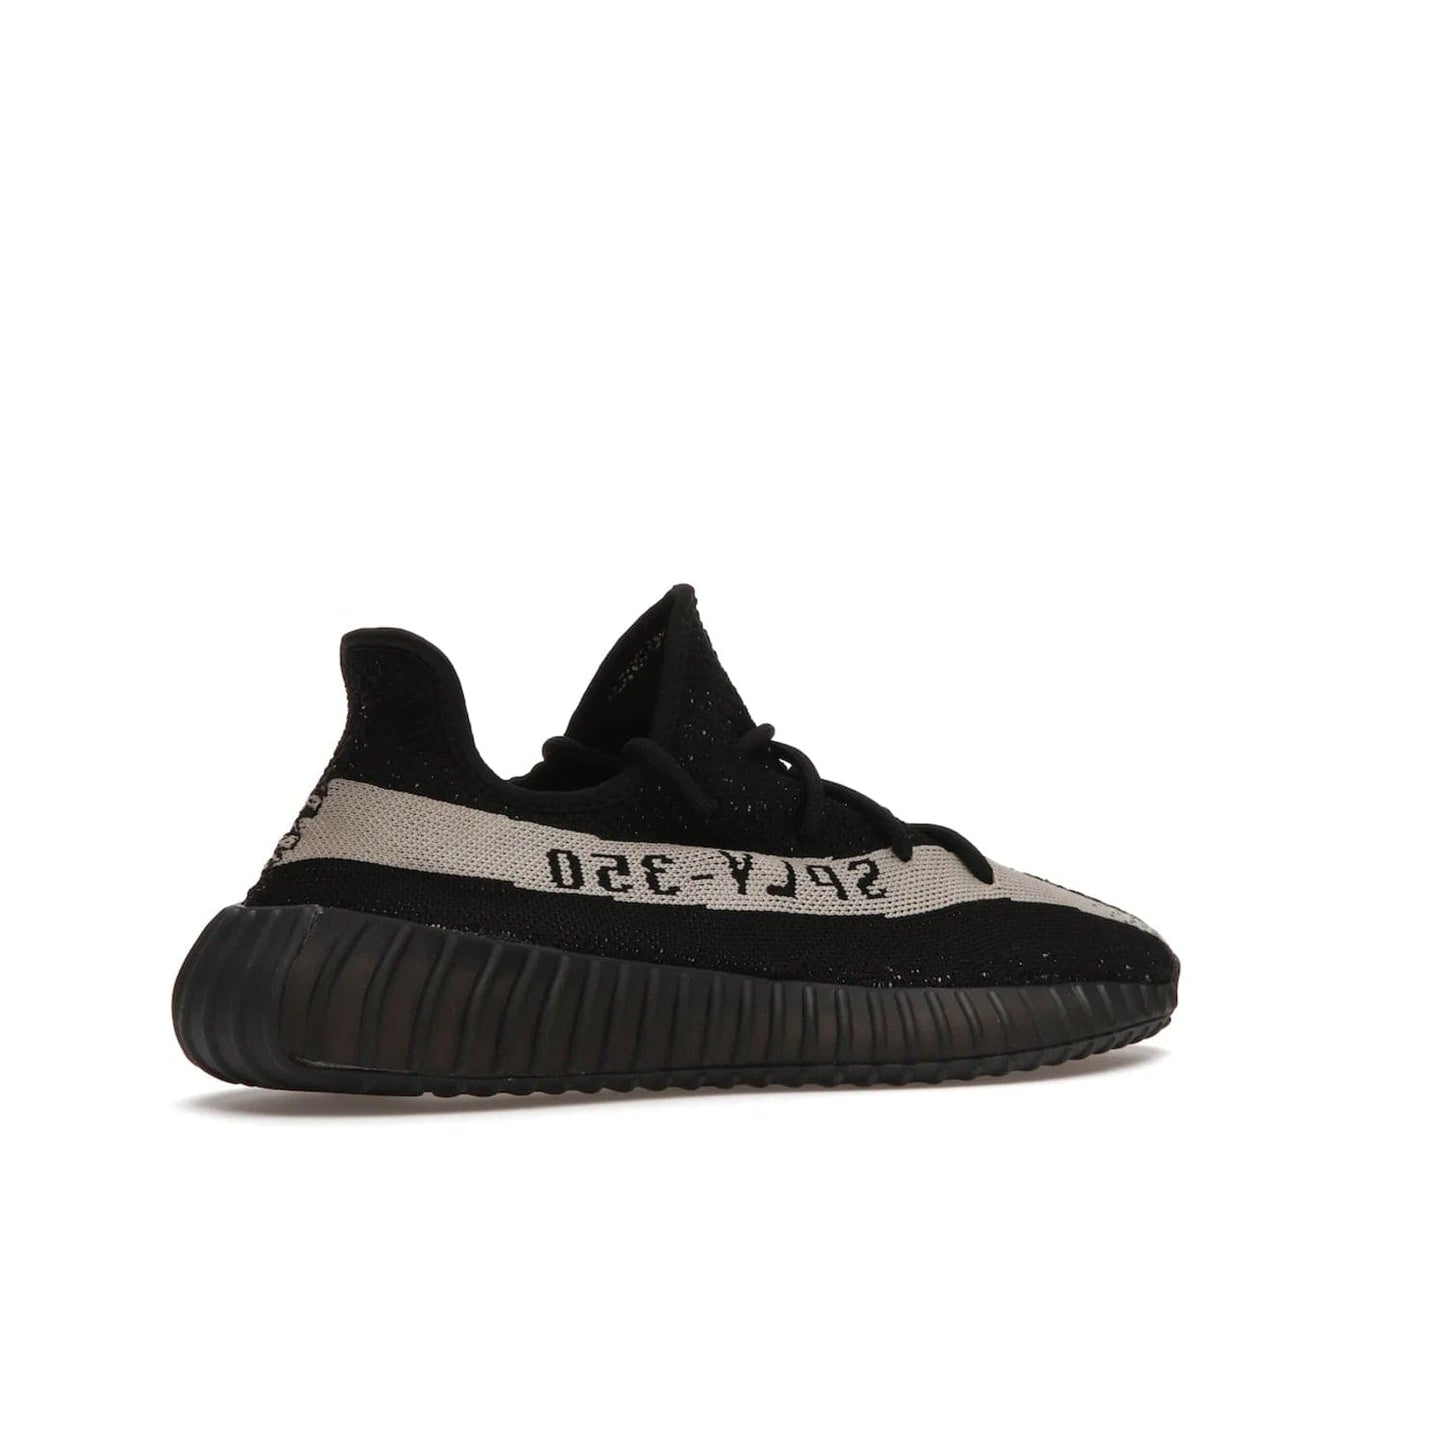 adidas Yeezy Boost 350 V2 Core Black White (2016/2022) - Image 34 - Only at www.BallersClubKickz.com - Stylish adidas Yeezy Boost 350 V2 in classic black with white "SPLY-350" stitched to the side stripe. Features Primeknit upper & Boost sole for comfort. Restock in March 2022.